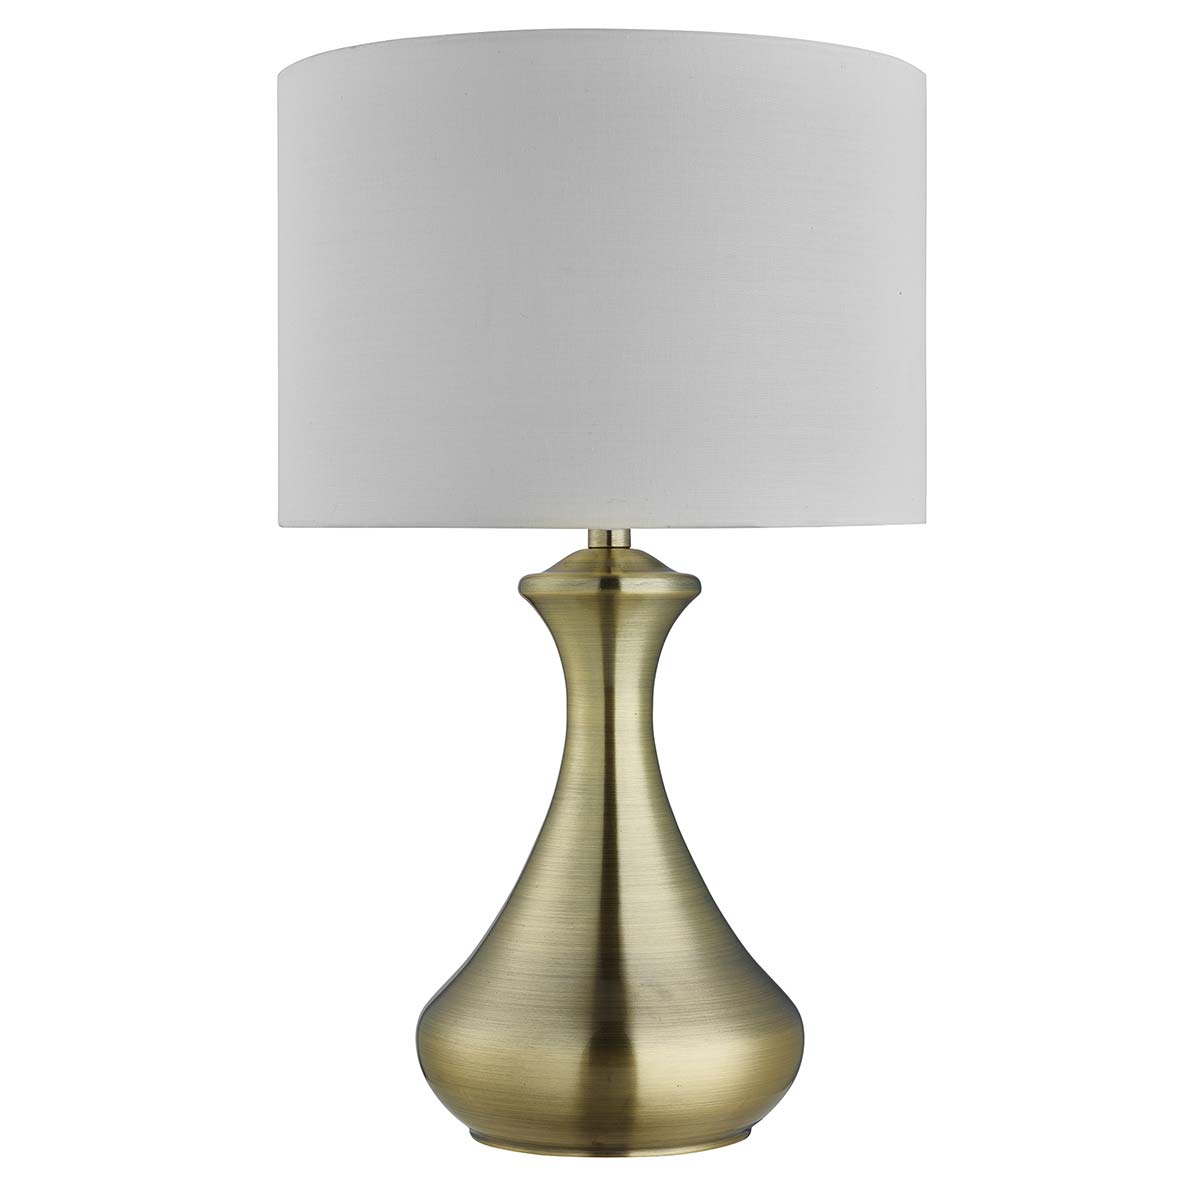 Touch Bedside Table Lamp Antique Brass Cream Shade